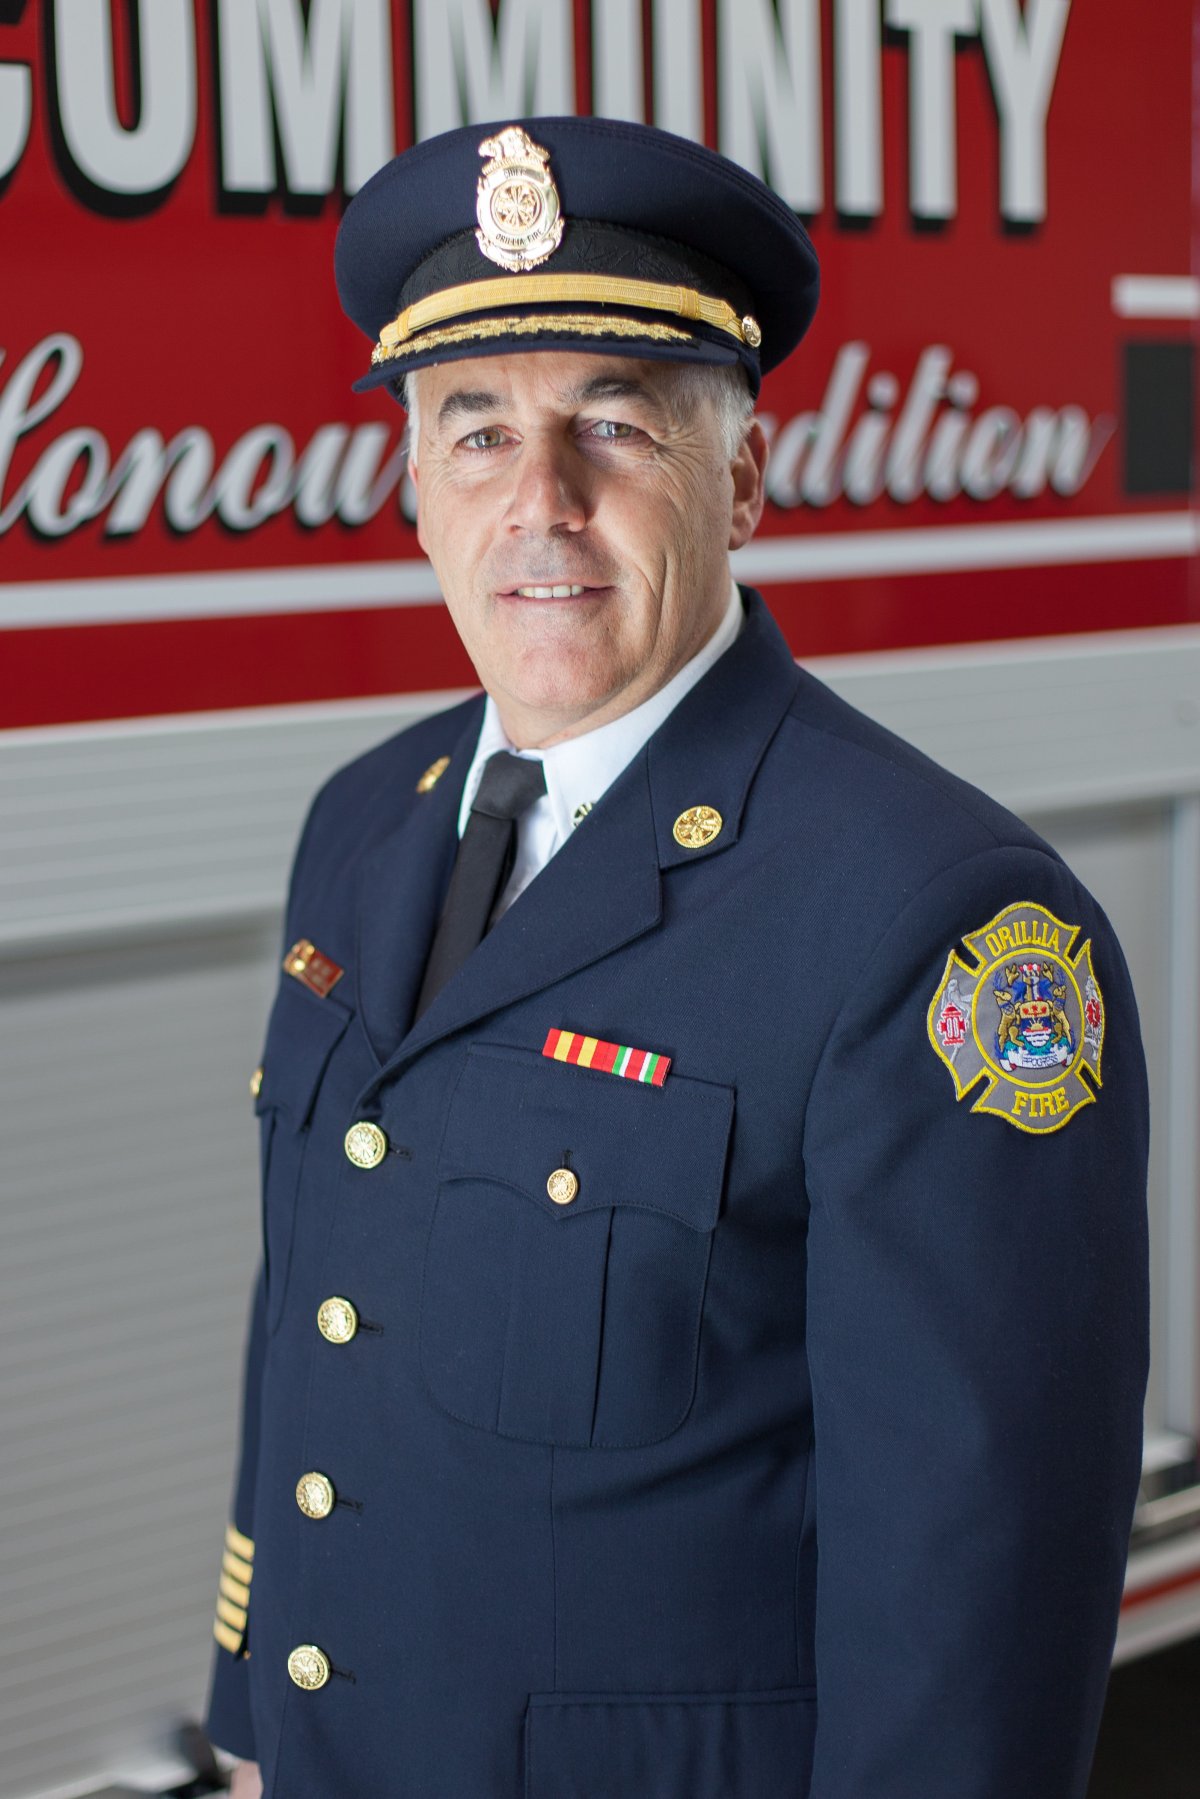 City officials say Chief Dominelli's last day will be March 29.